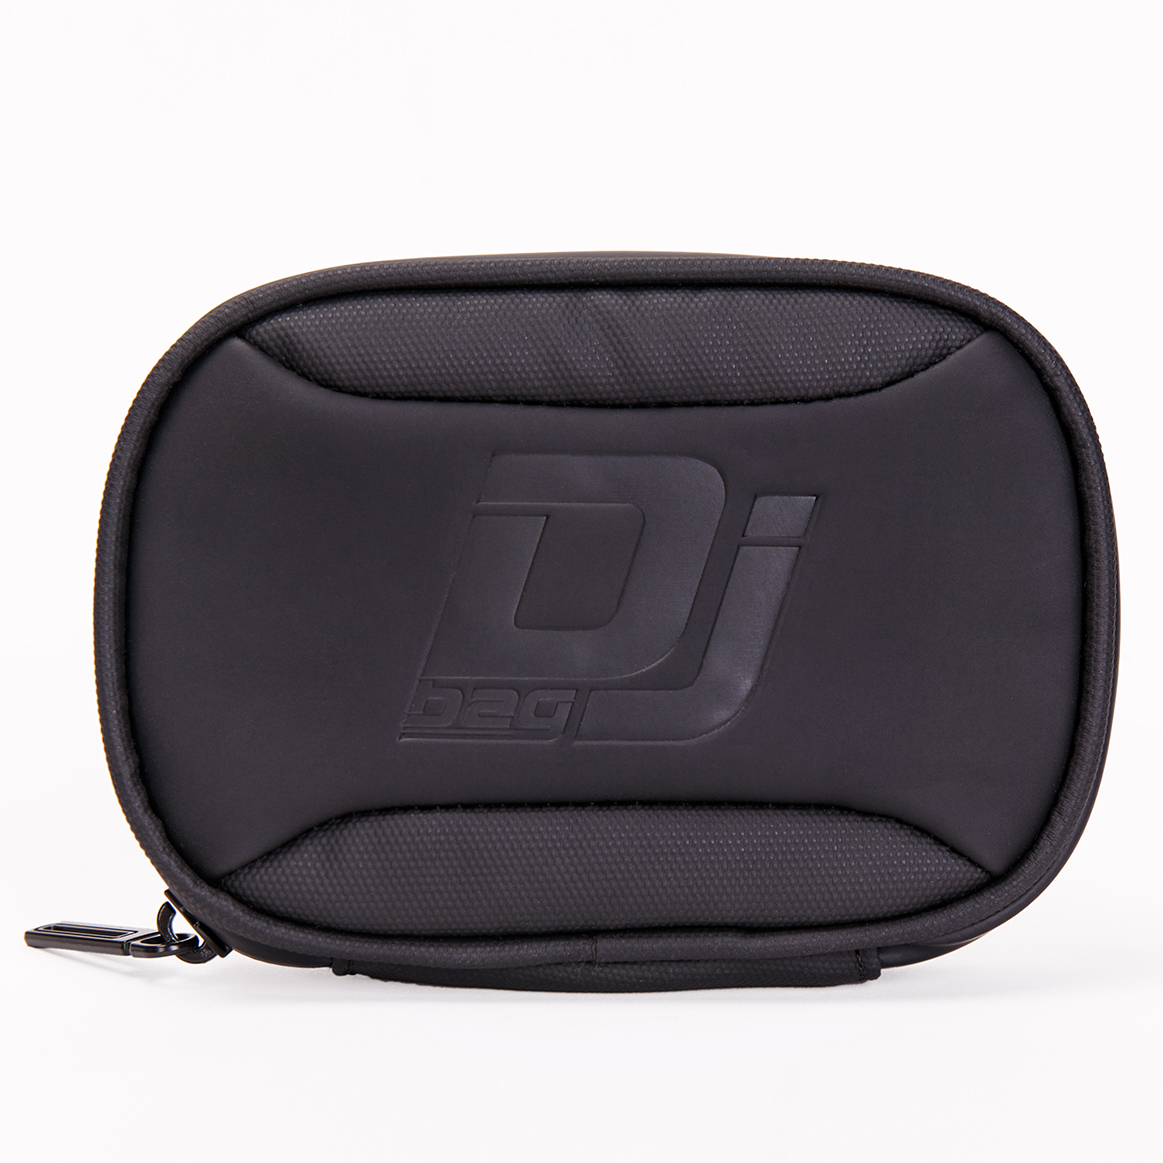 Bags cases for musical from DJ BAG